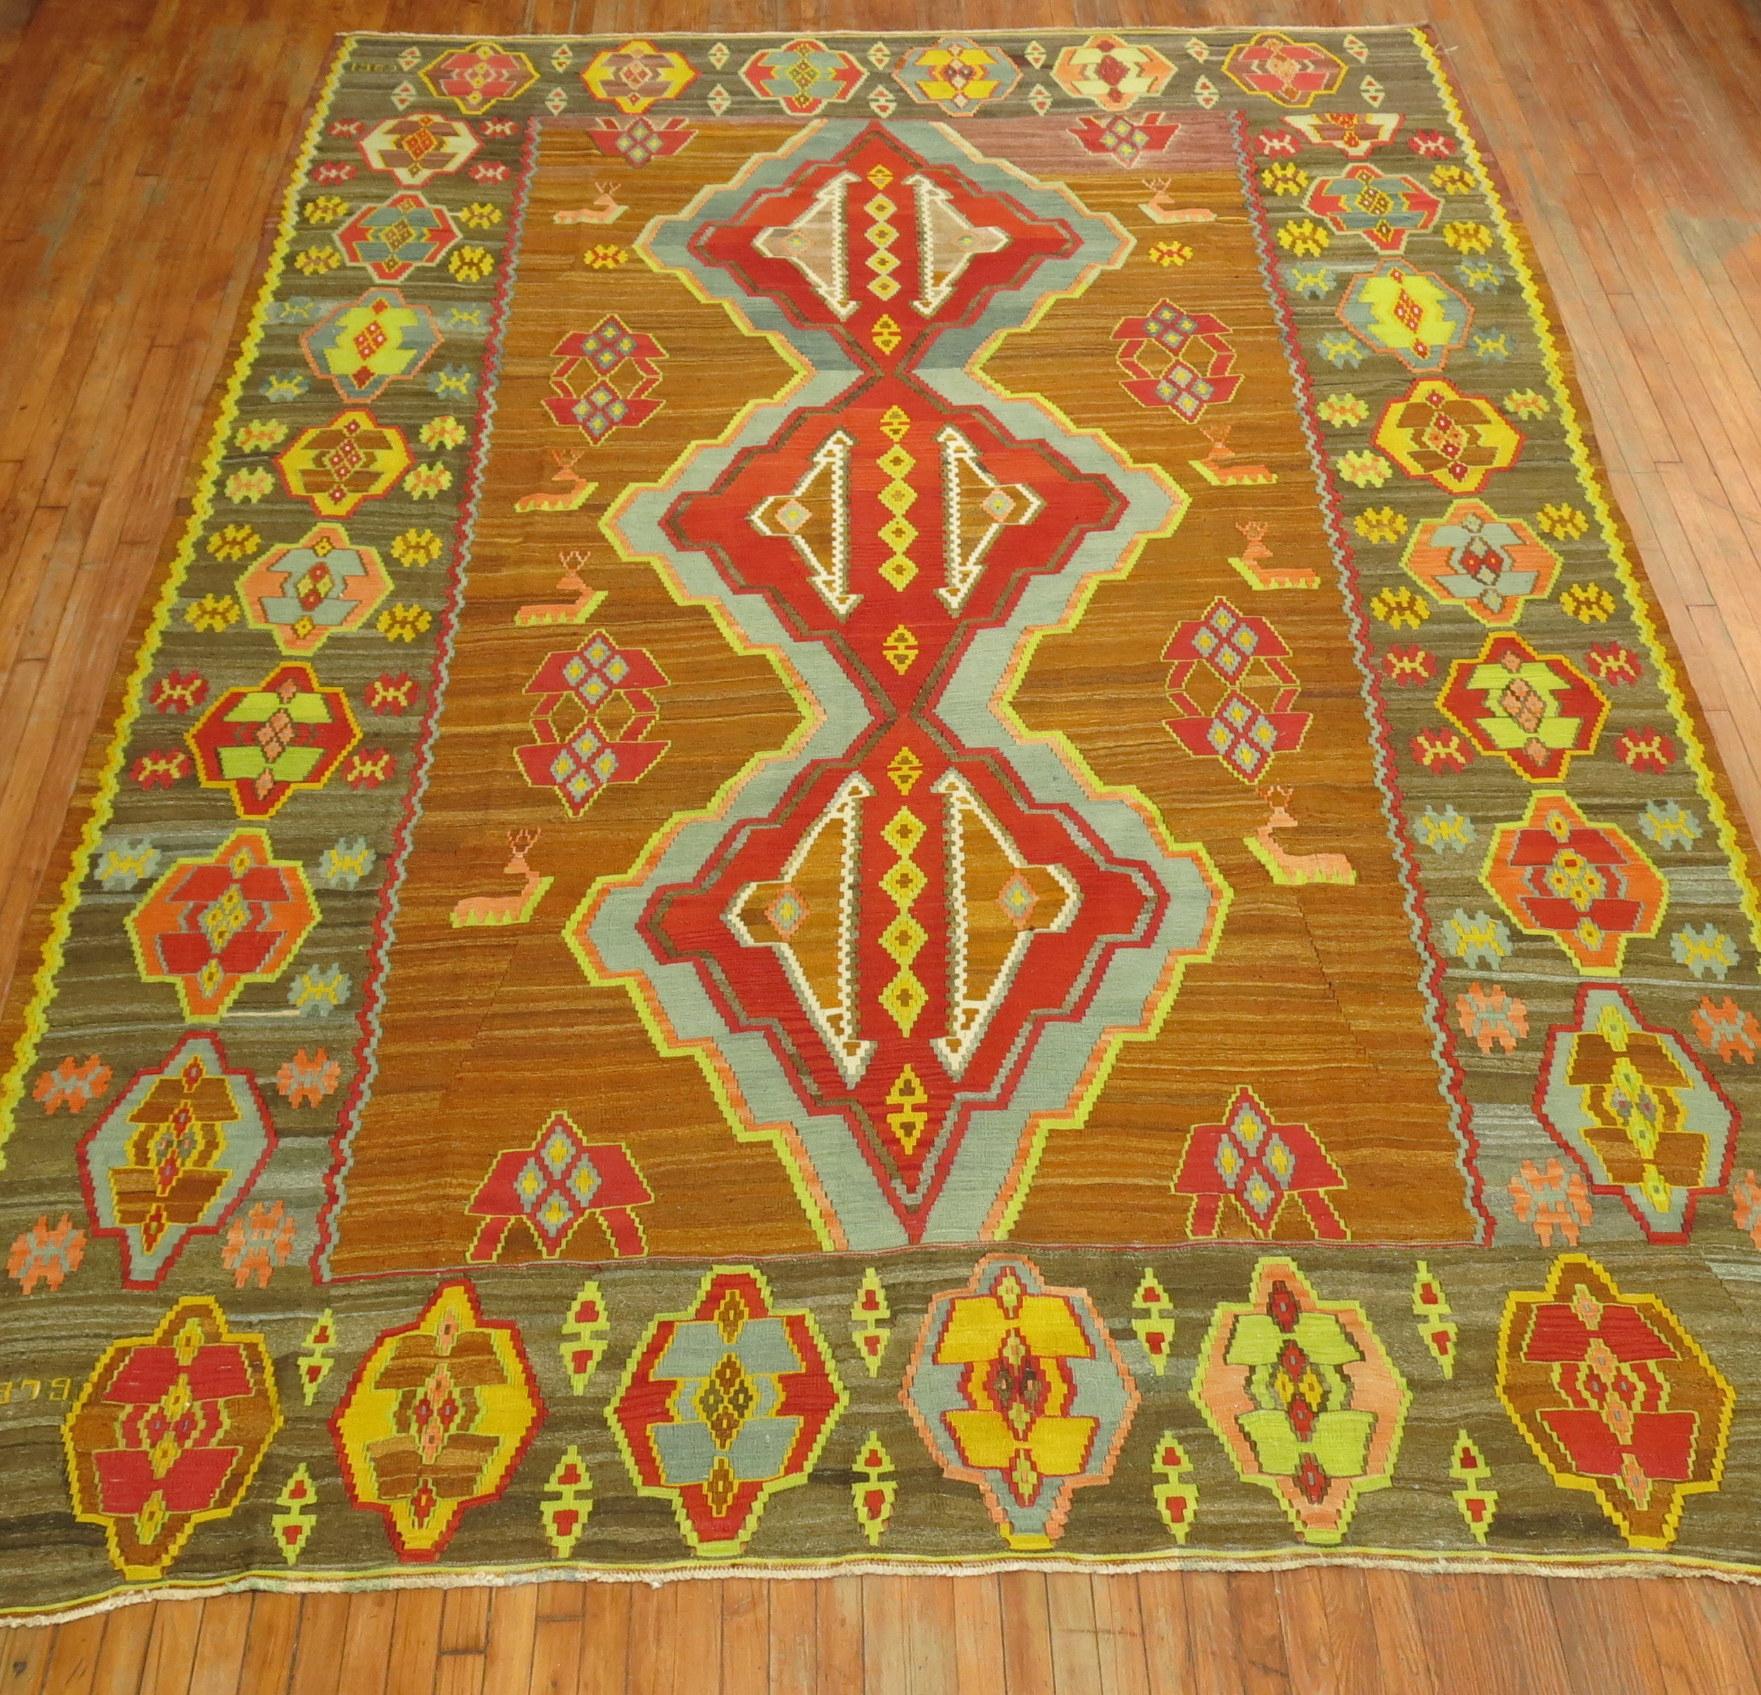 Spectacular one of a kind colorful vintage Turkish Kilim. 3 Large geometric medallions on a brown field surrounded by a bunch of deers and a crazy large tribal border. Dated 1979 on 1 border & 1980 on another end border showing the year the weaver